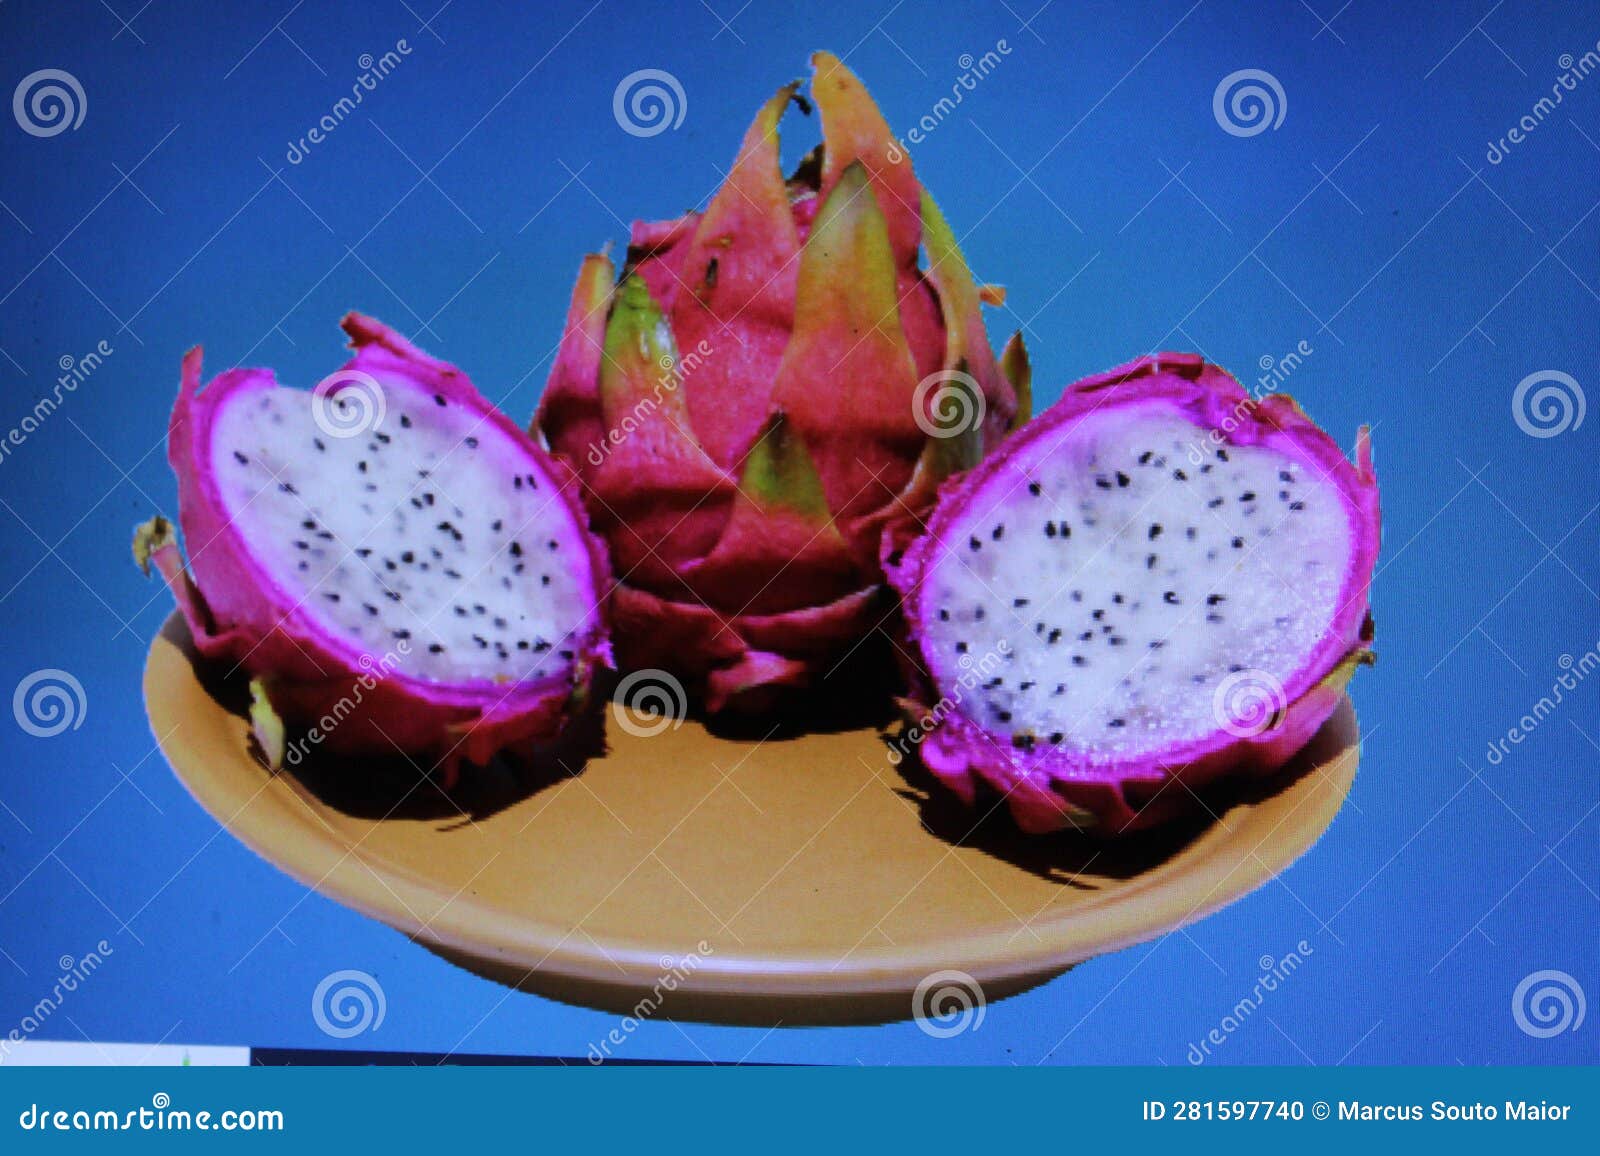 after the flower the fruit pitaia or fruit of the red dragon